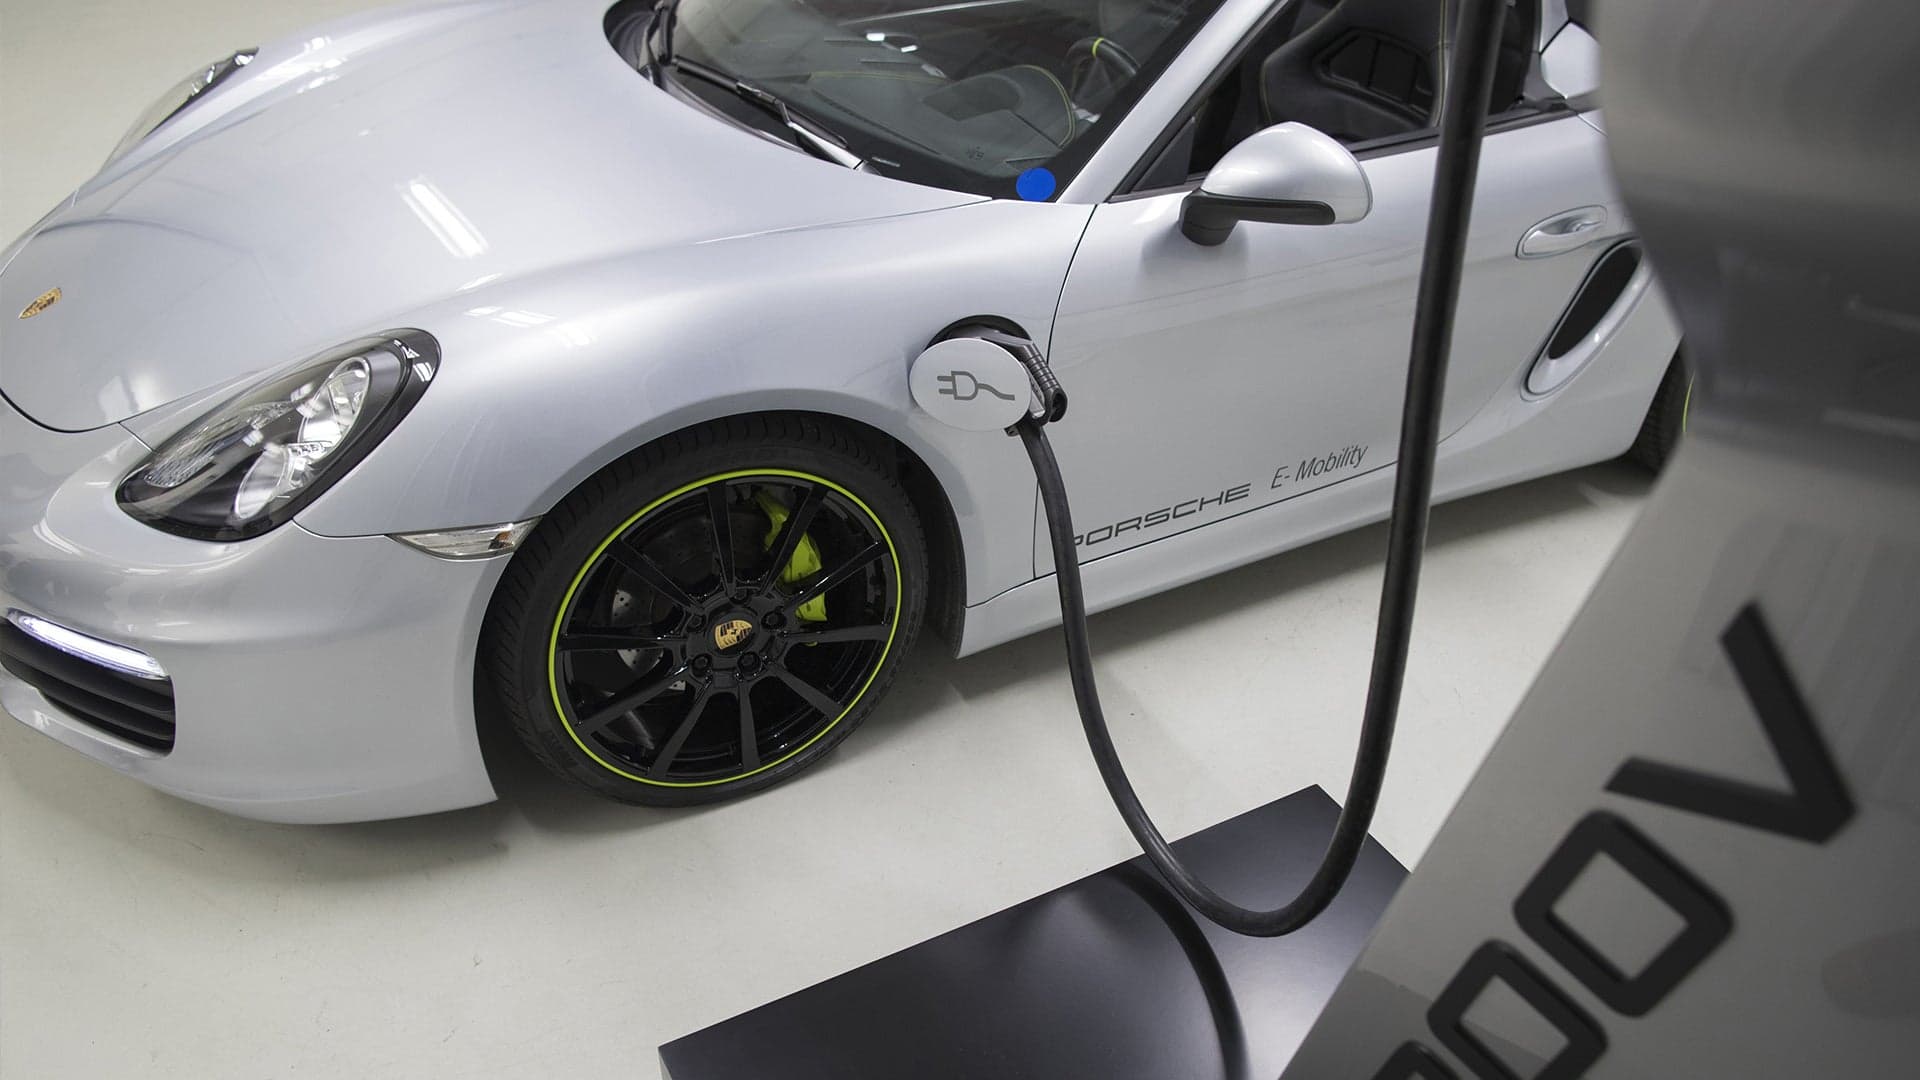 Porsche to Install 500 Ultra-Fast Chargers in U.S. by End of 2019